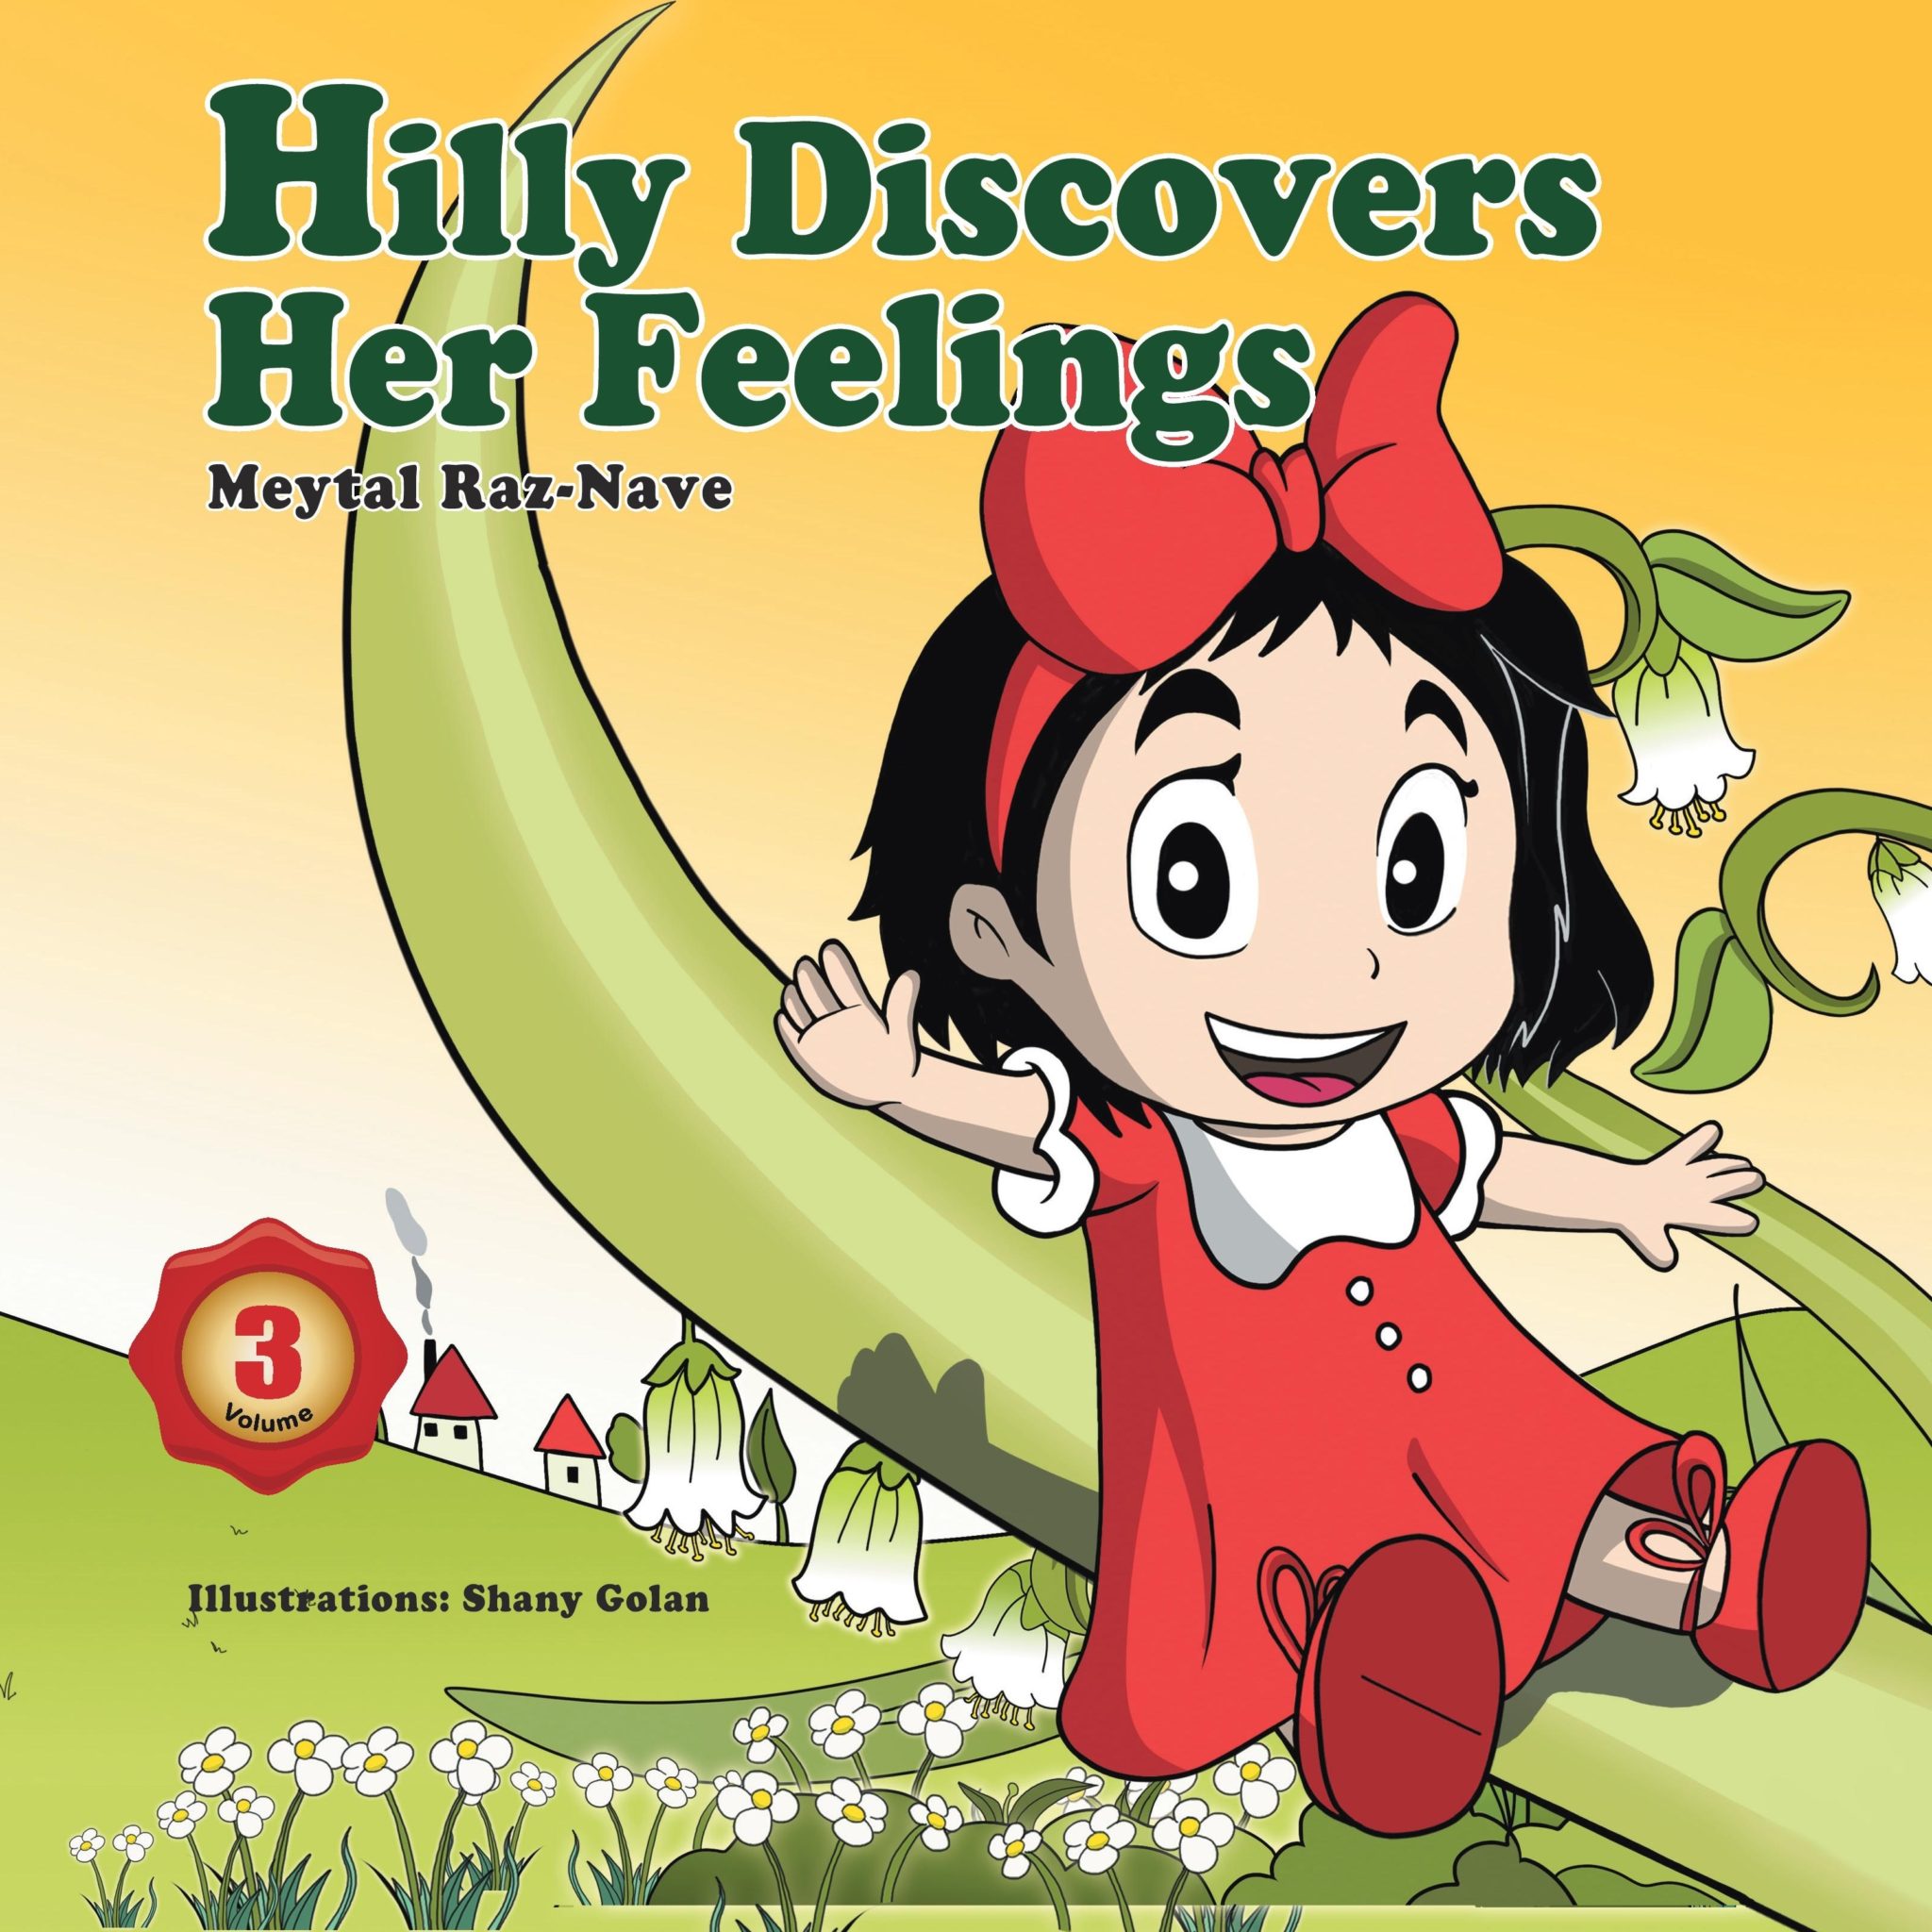 FREE: Hilly Discovers Her Feelings by Meytal Raz-Nave